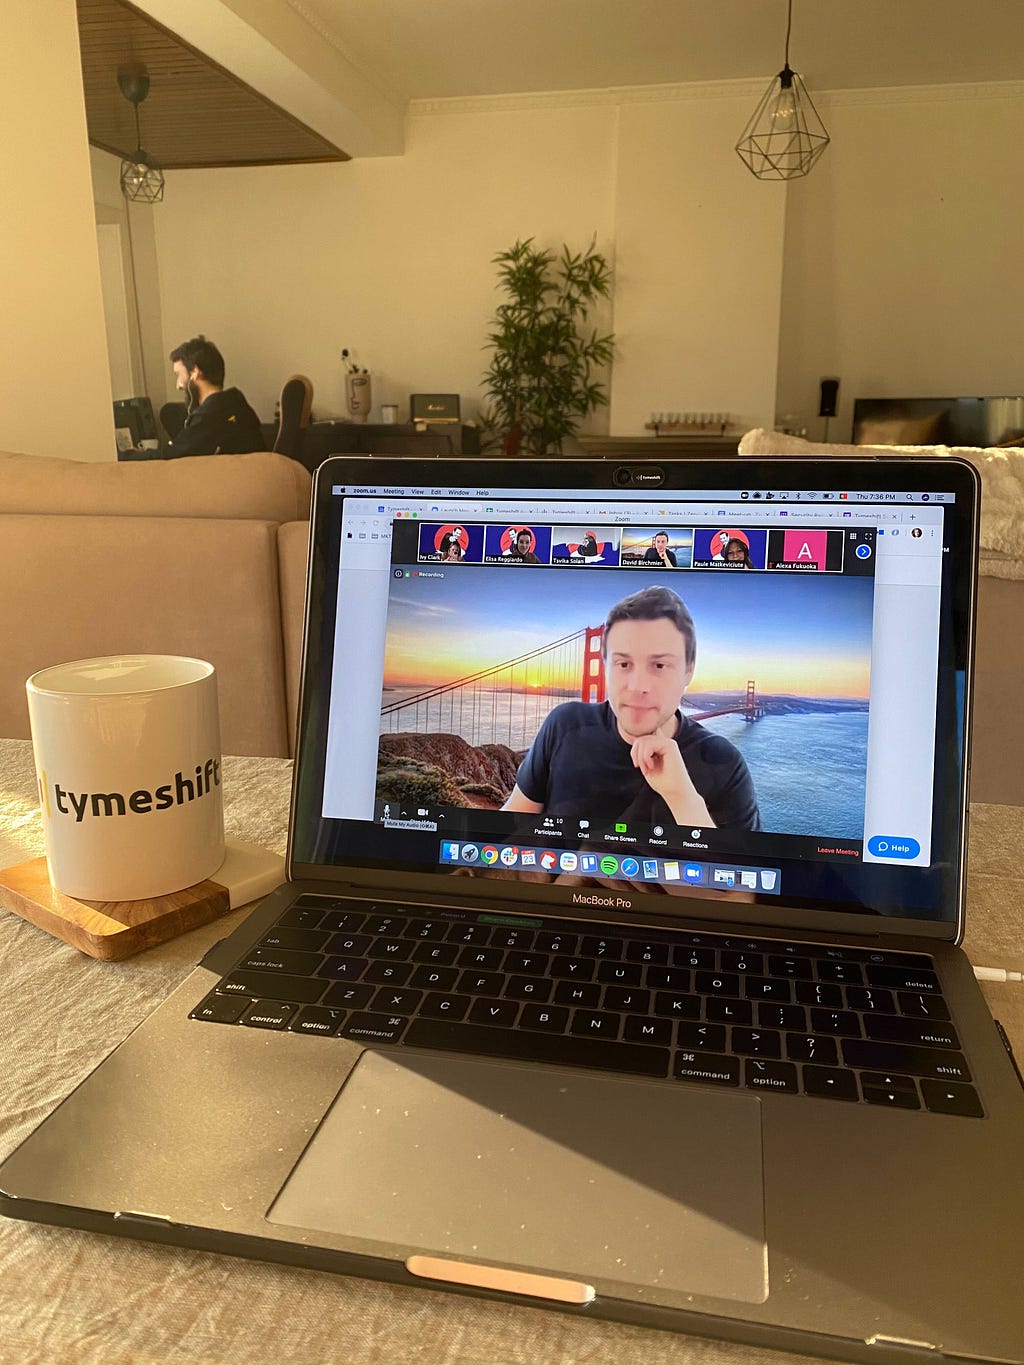 A mug and laptop sit on a table with a Zoom meeting showing on the laptop screen.